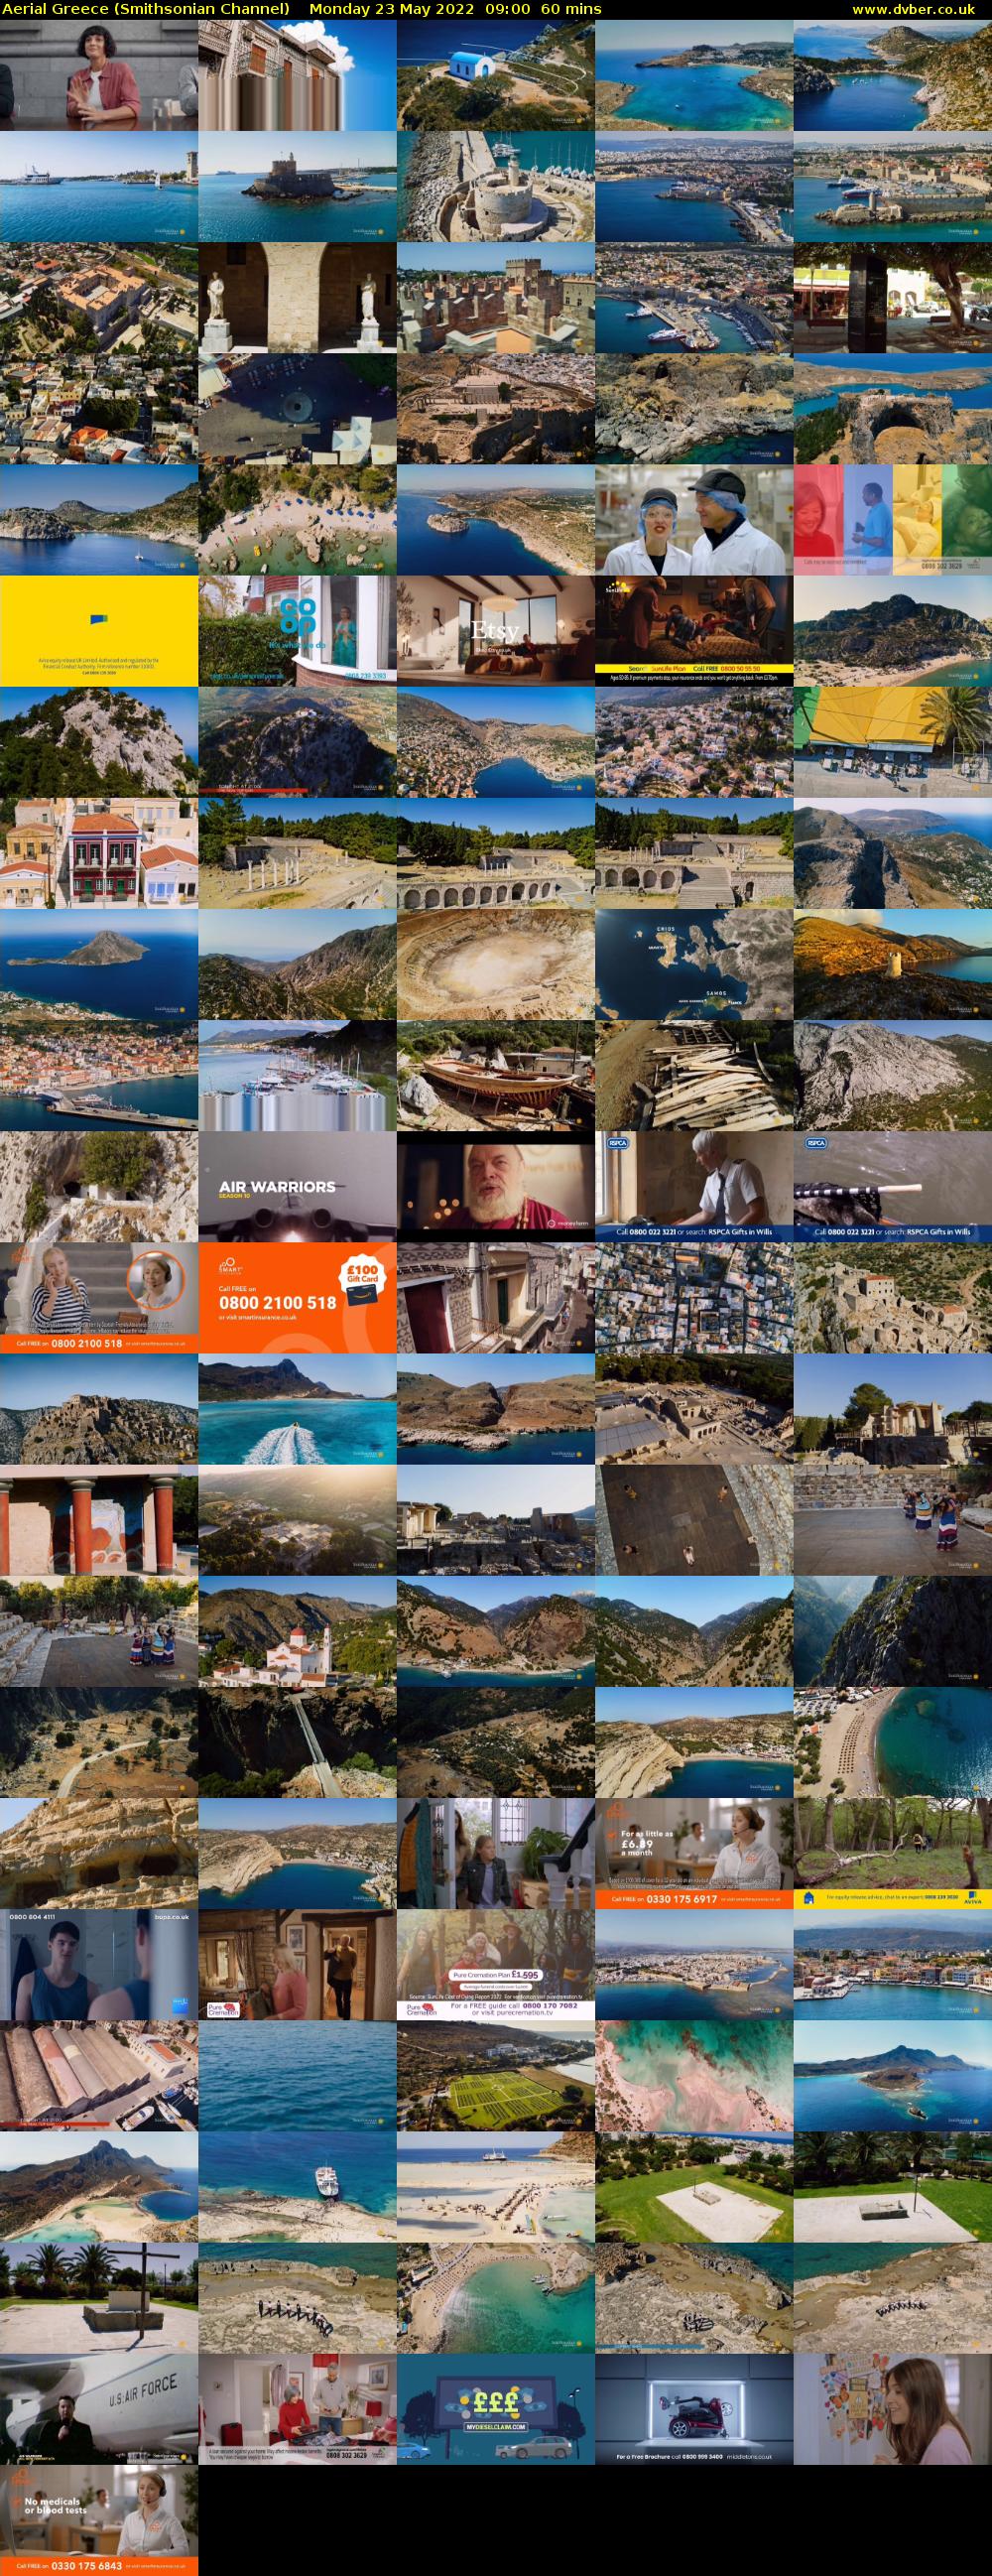 Aerial Greece (Smithsonian Channel) Monday 23 May 2022 09:00 - 10:00